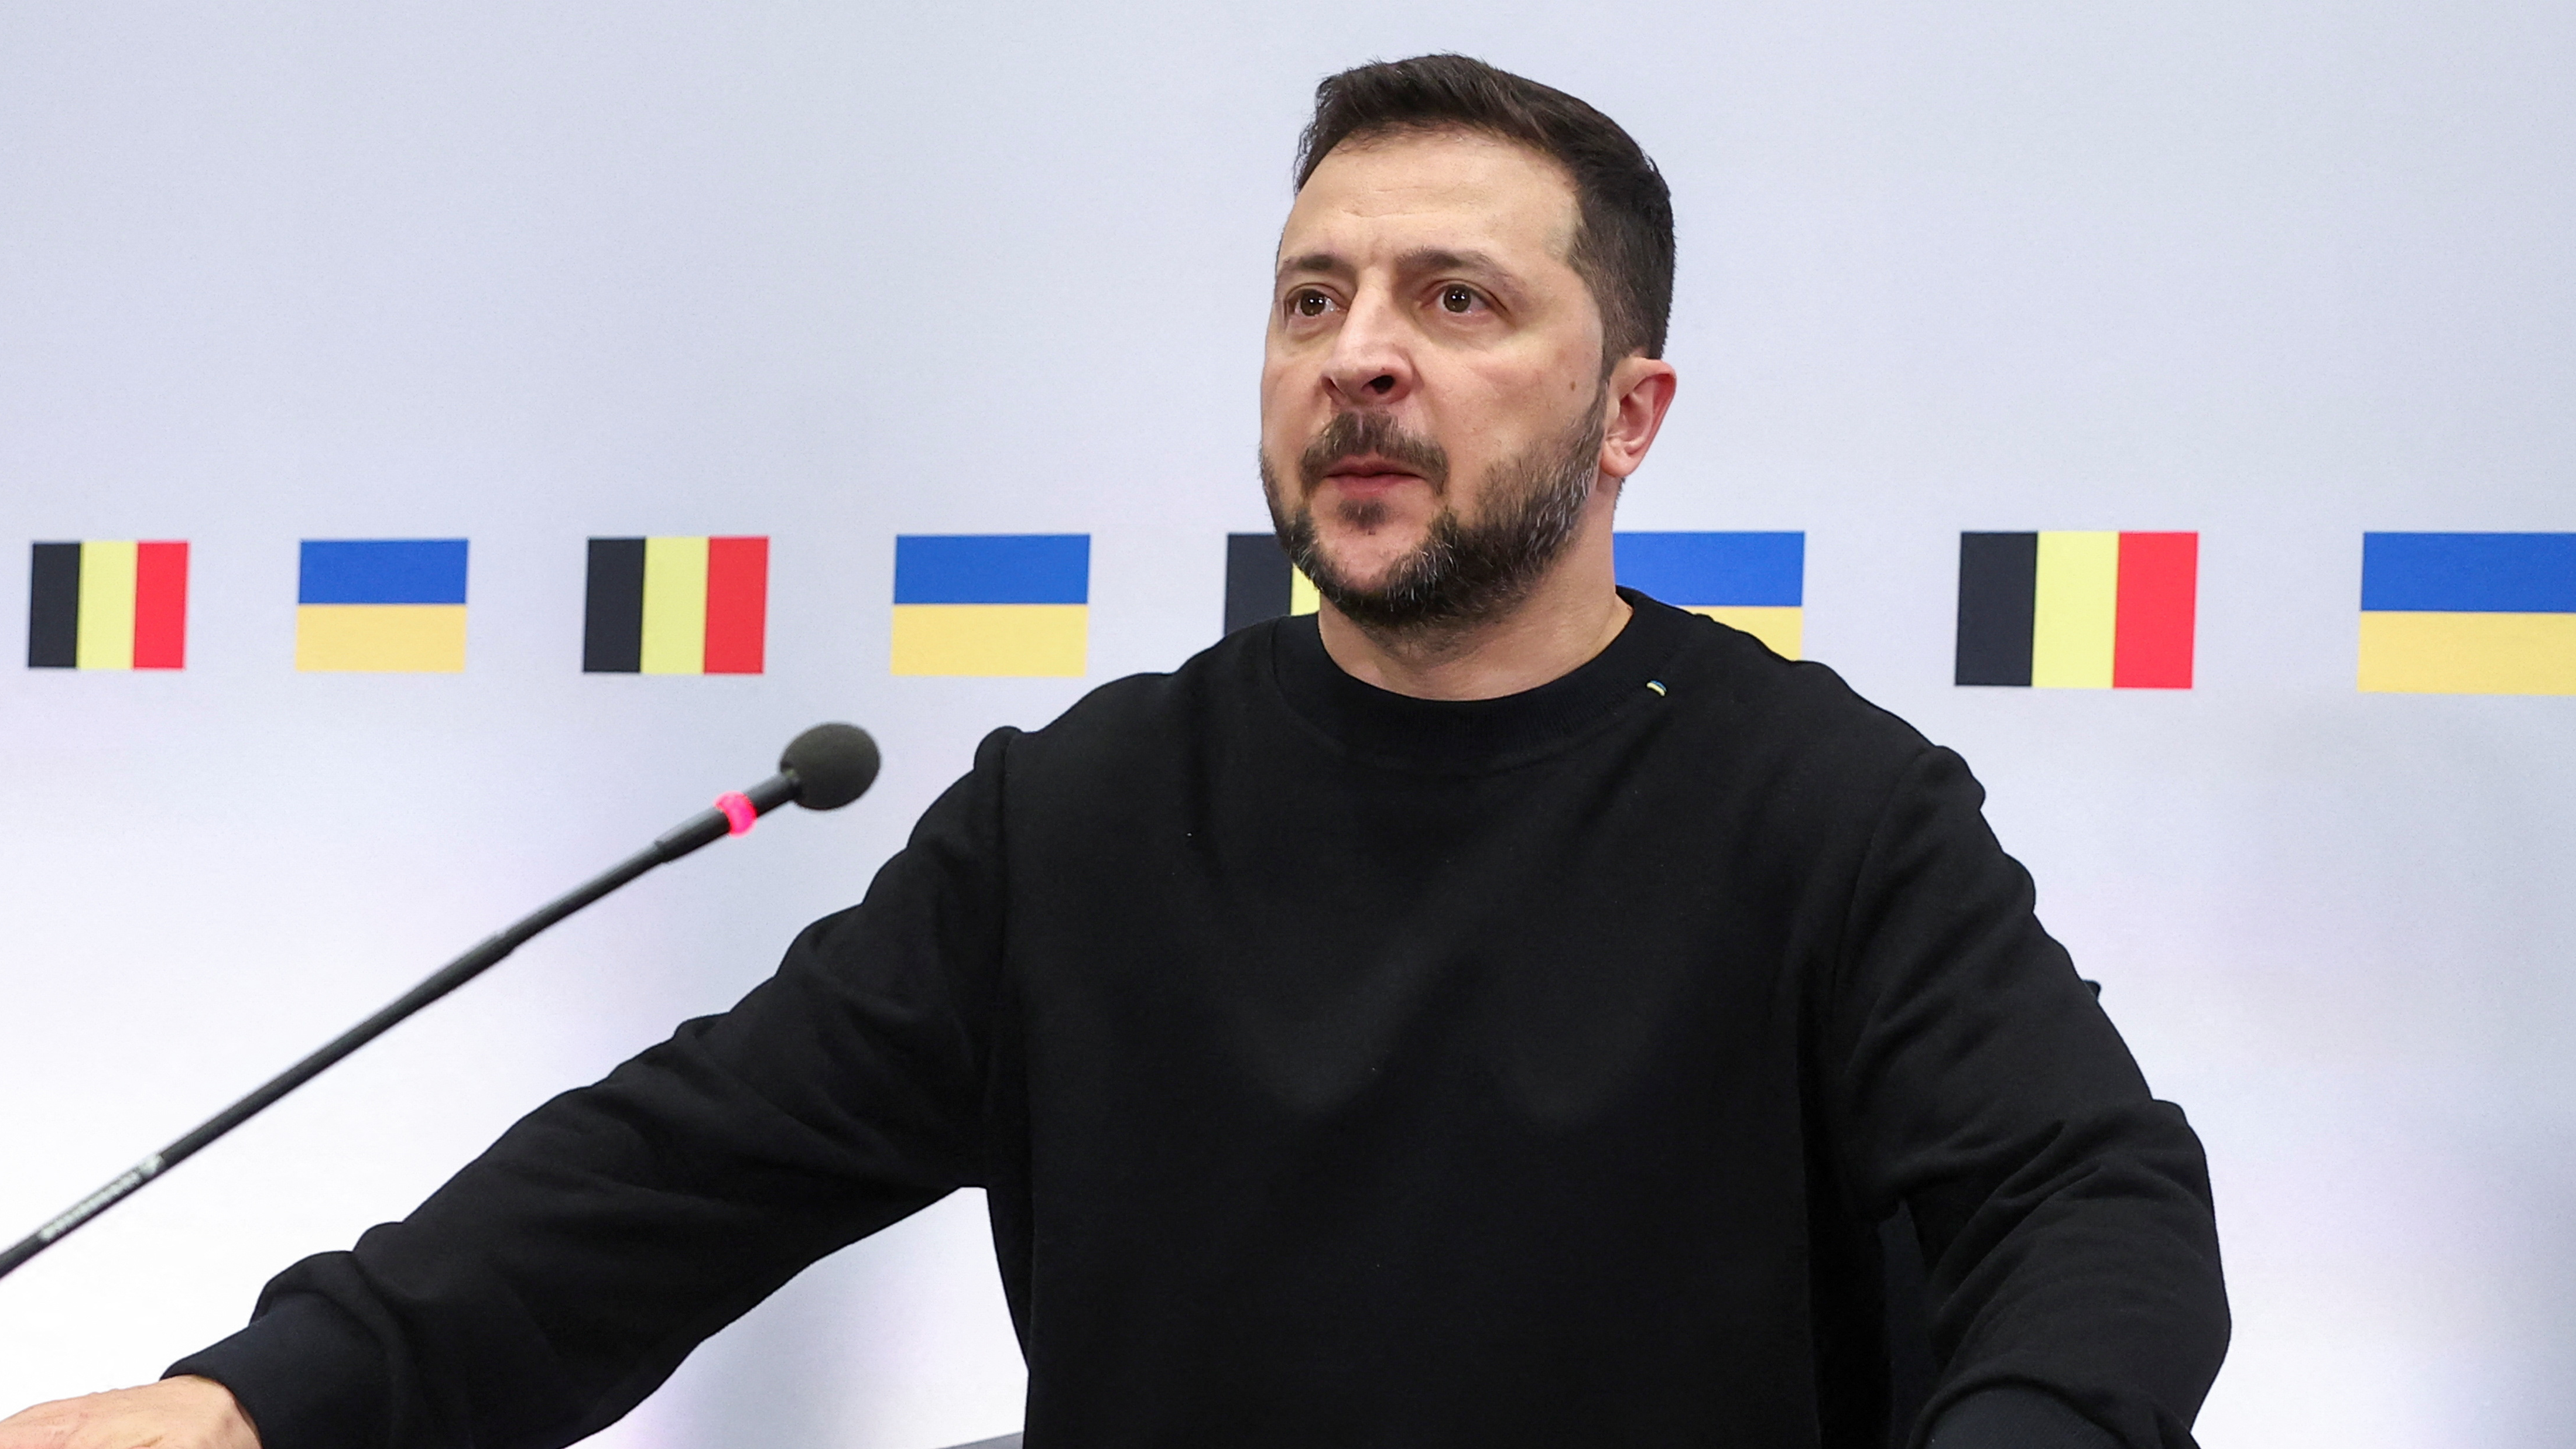 Ukraine has been under martial law - which prohibits elections - since the conflict with Russia began in February 2022. Zelenskyy remains popular with Ukrainians and would be expected to win a second term in power./Reuters/Yves Herman. 